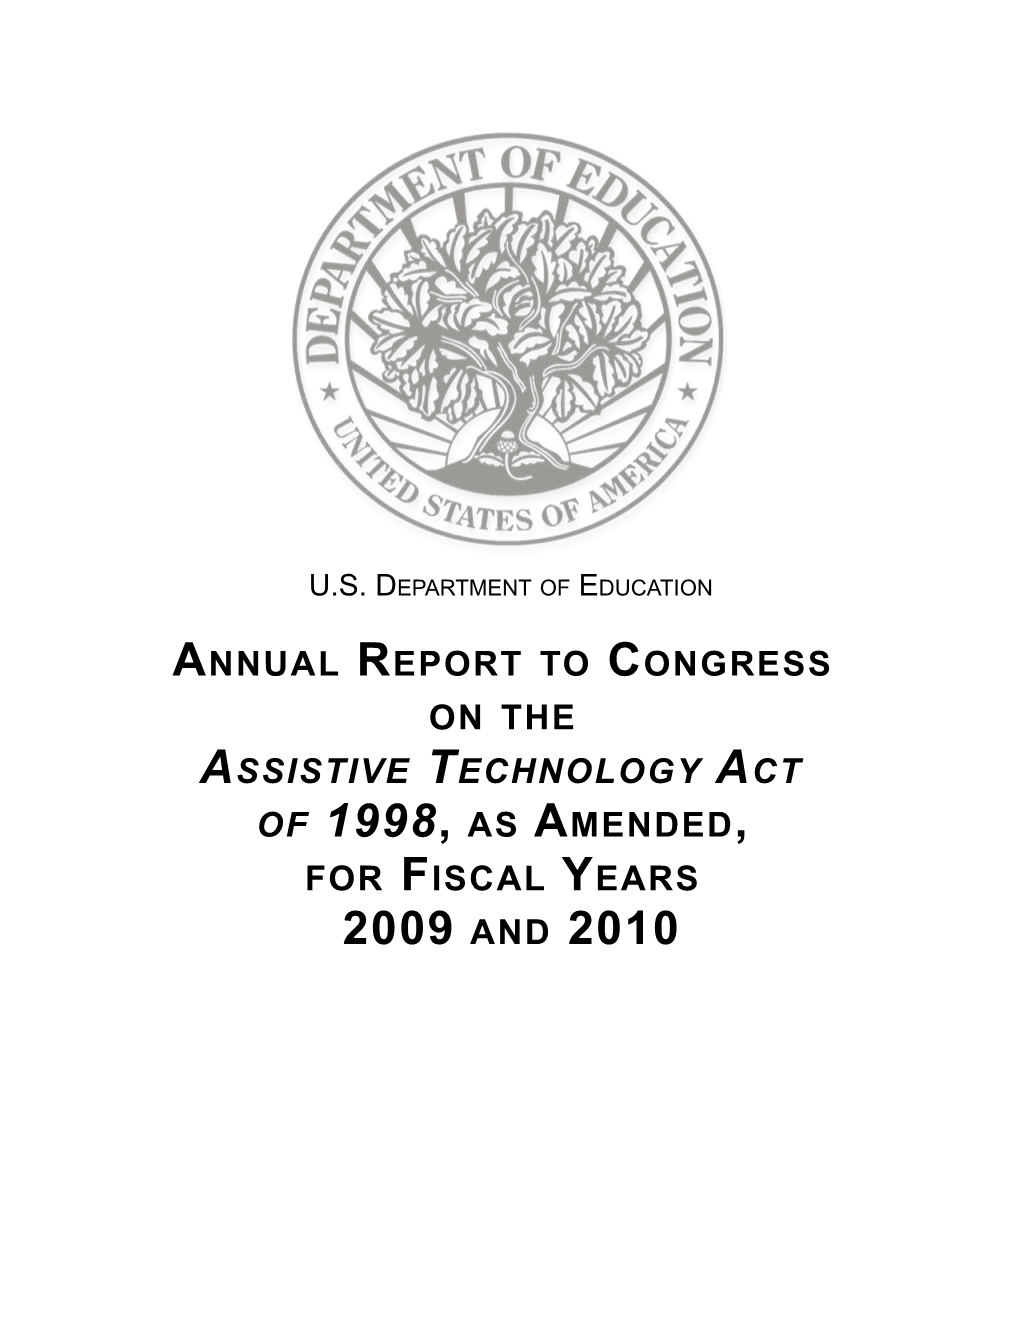 Annual Report to Congress on the Assistive Technology Act of 1998, As Amended, for Fiscal